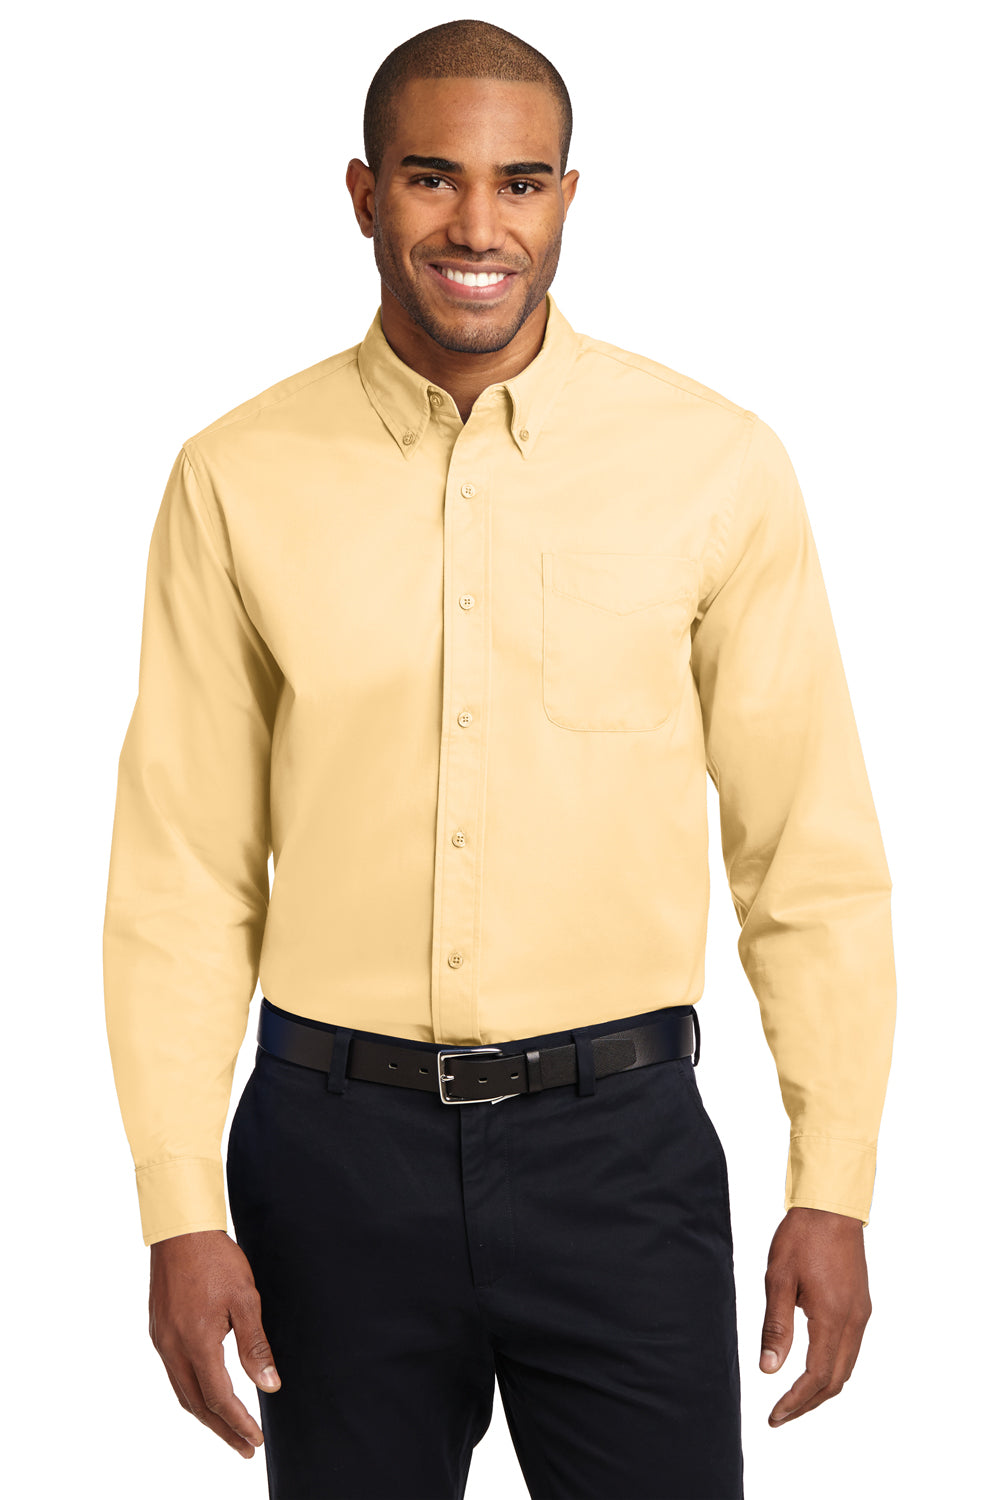 Port Authority S608/TLS608/S608ES Mens Easy Care Wrinkle Resistant Long Sleeve Button Down Shirt w/ Pocket Yellow Front